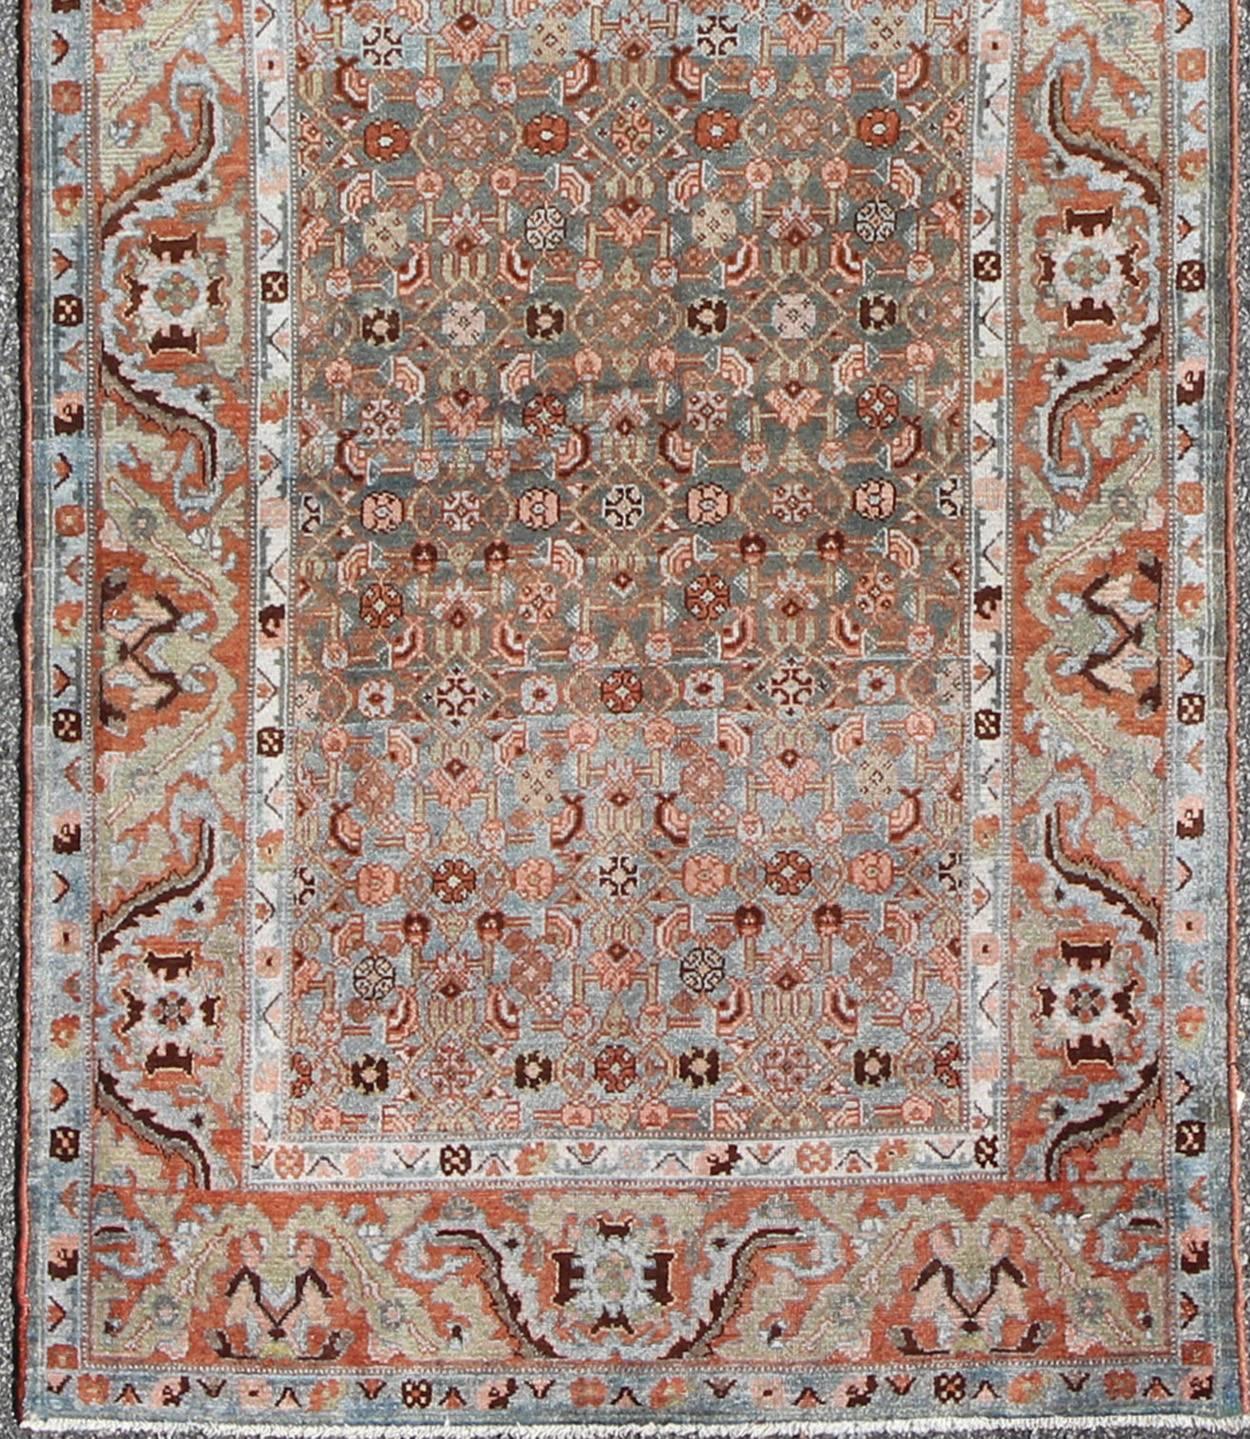 Multicolored antique Persian Malayer runner with blue background, floral motifs, rug ema-7507, country of origin / type: Iran / Malayer, circa 1910

This Persian Malayer runner from early 20th century Iran features an all-over sub-geometric floral